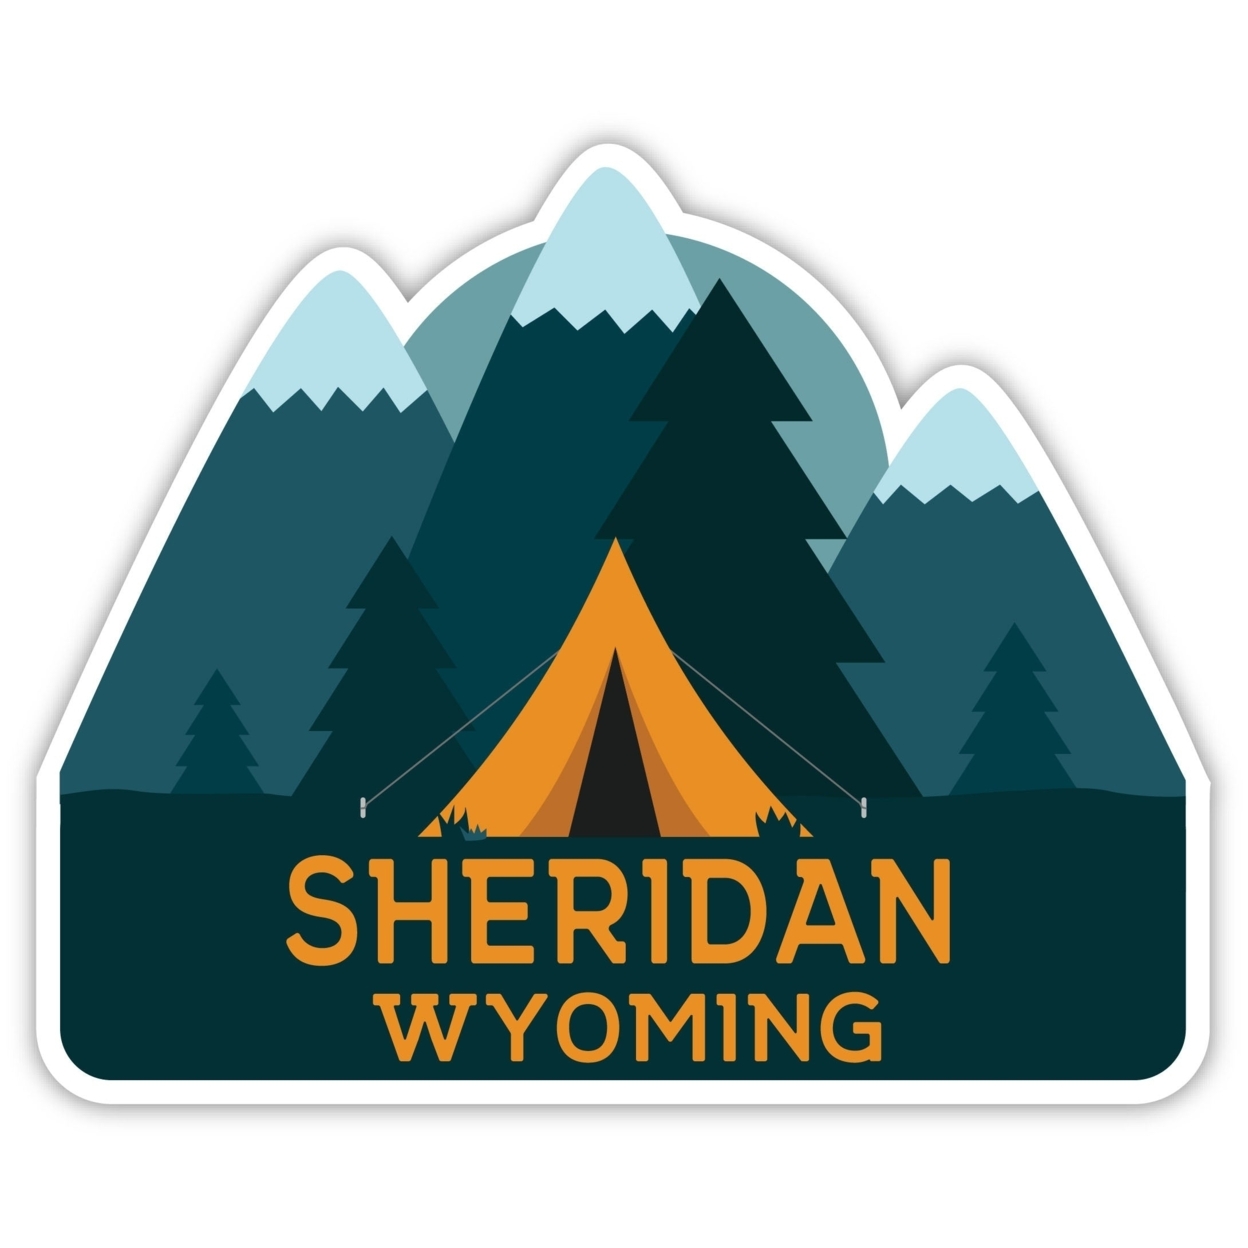 Sheridan Wyoming Souvenir Decorative Stickers (Choose Theme And Size) - Single Unit, 4-Inch, Camp Life